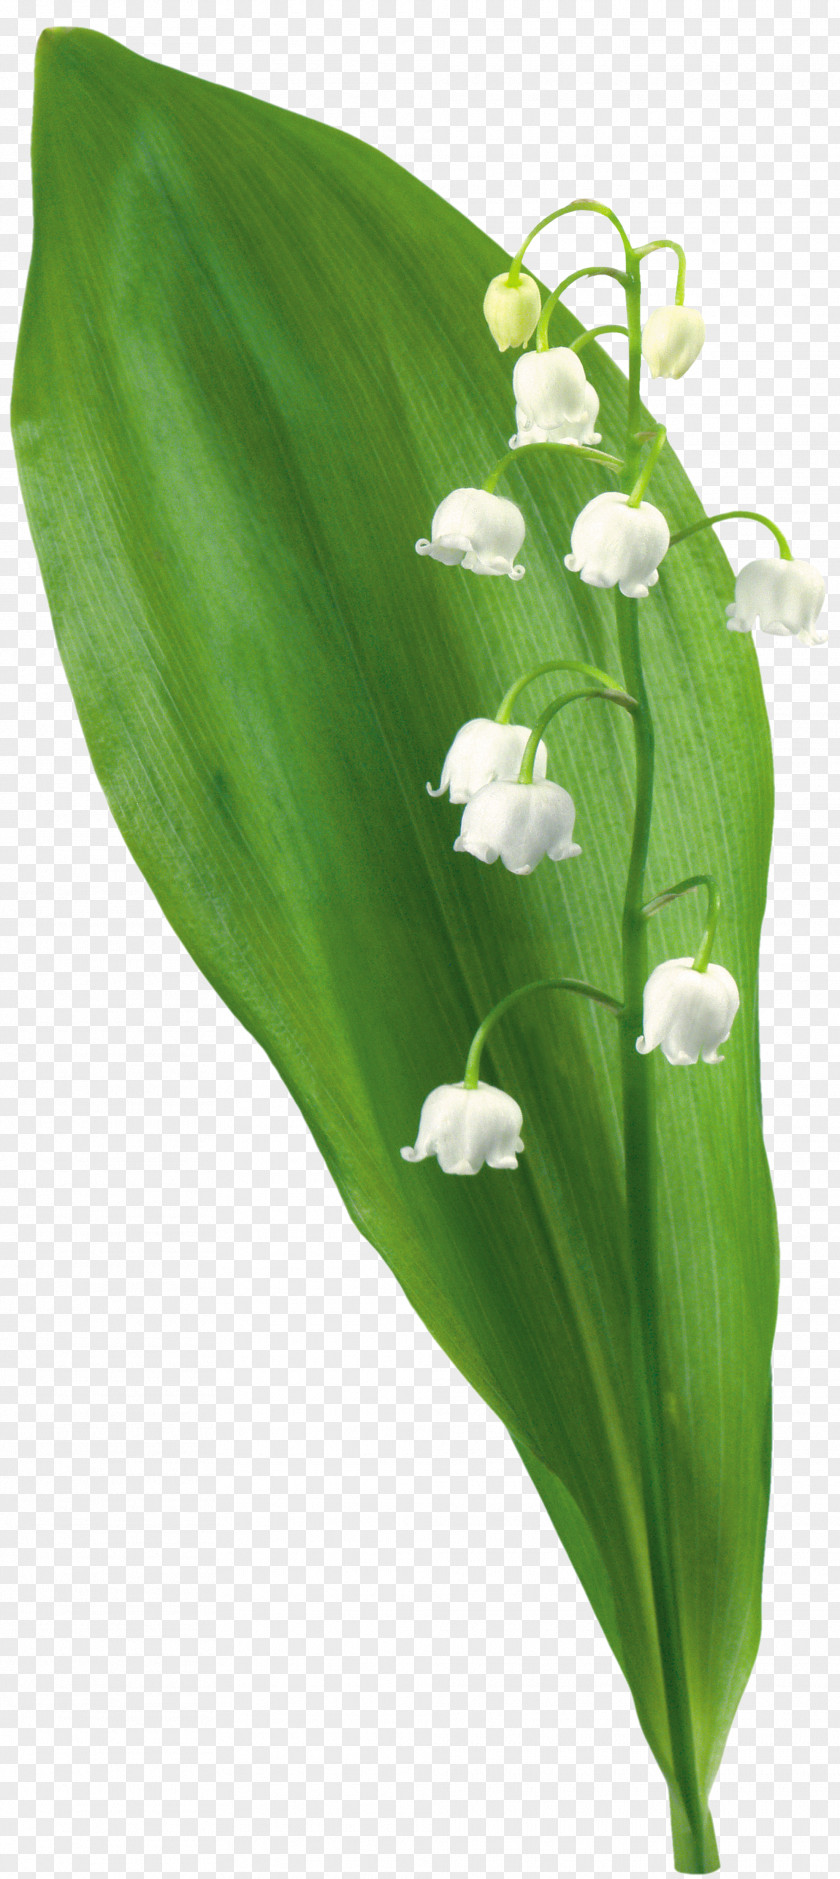 Lily Of The Valley Flower Plant Tree Clip Art PNG